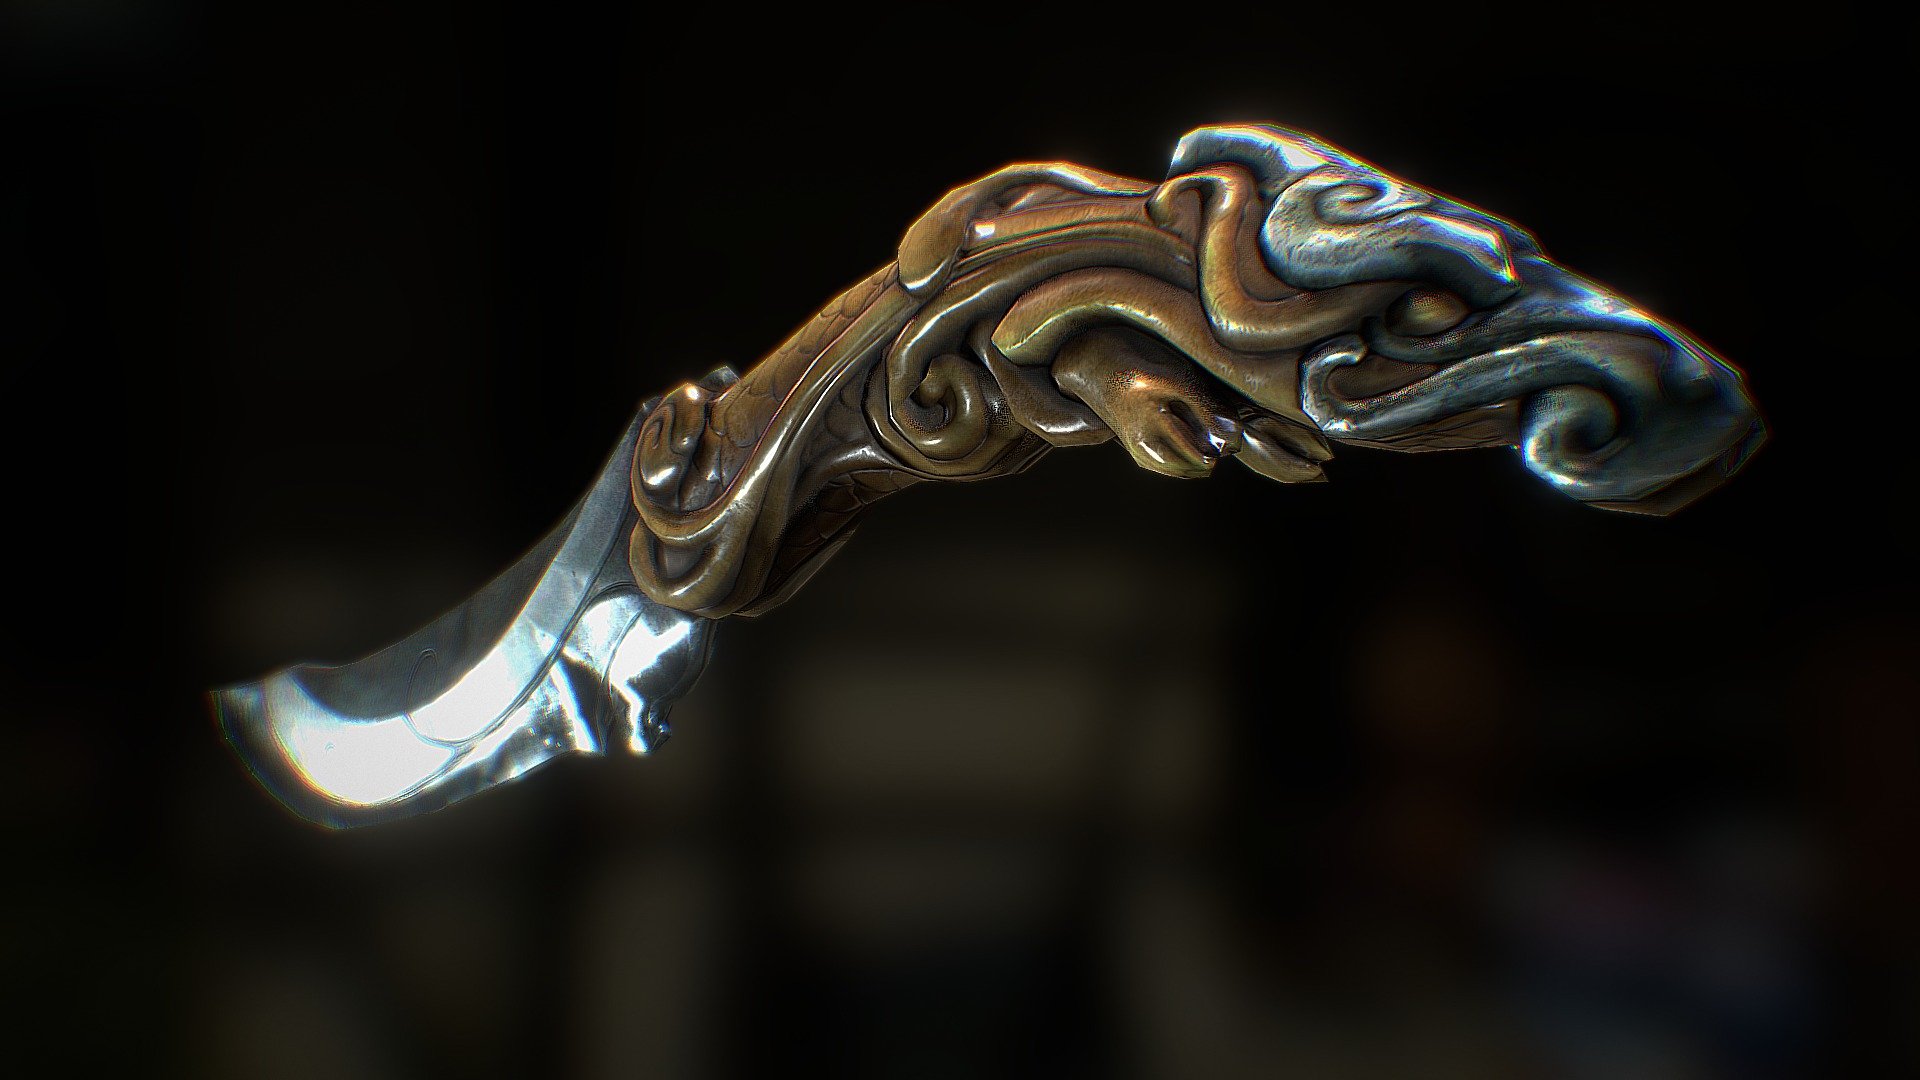 A dagger to be included in my asset pack.  Kind of&hellip; designed it as I went 3d model